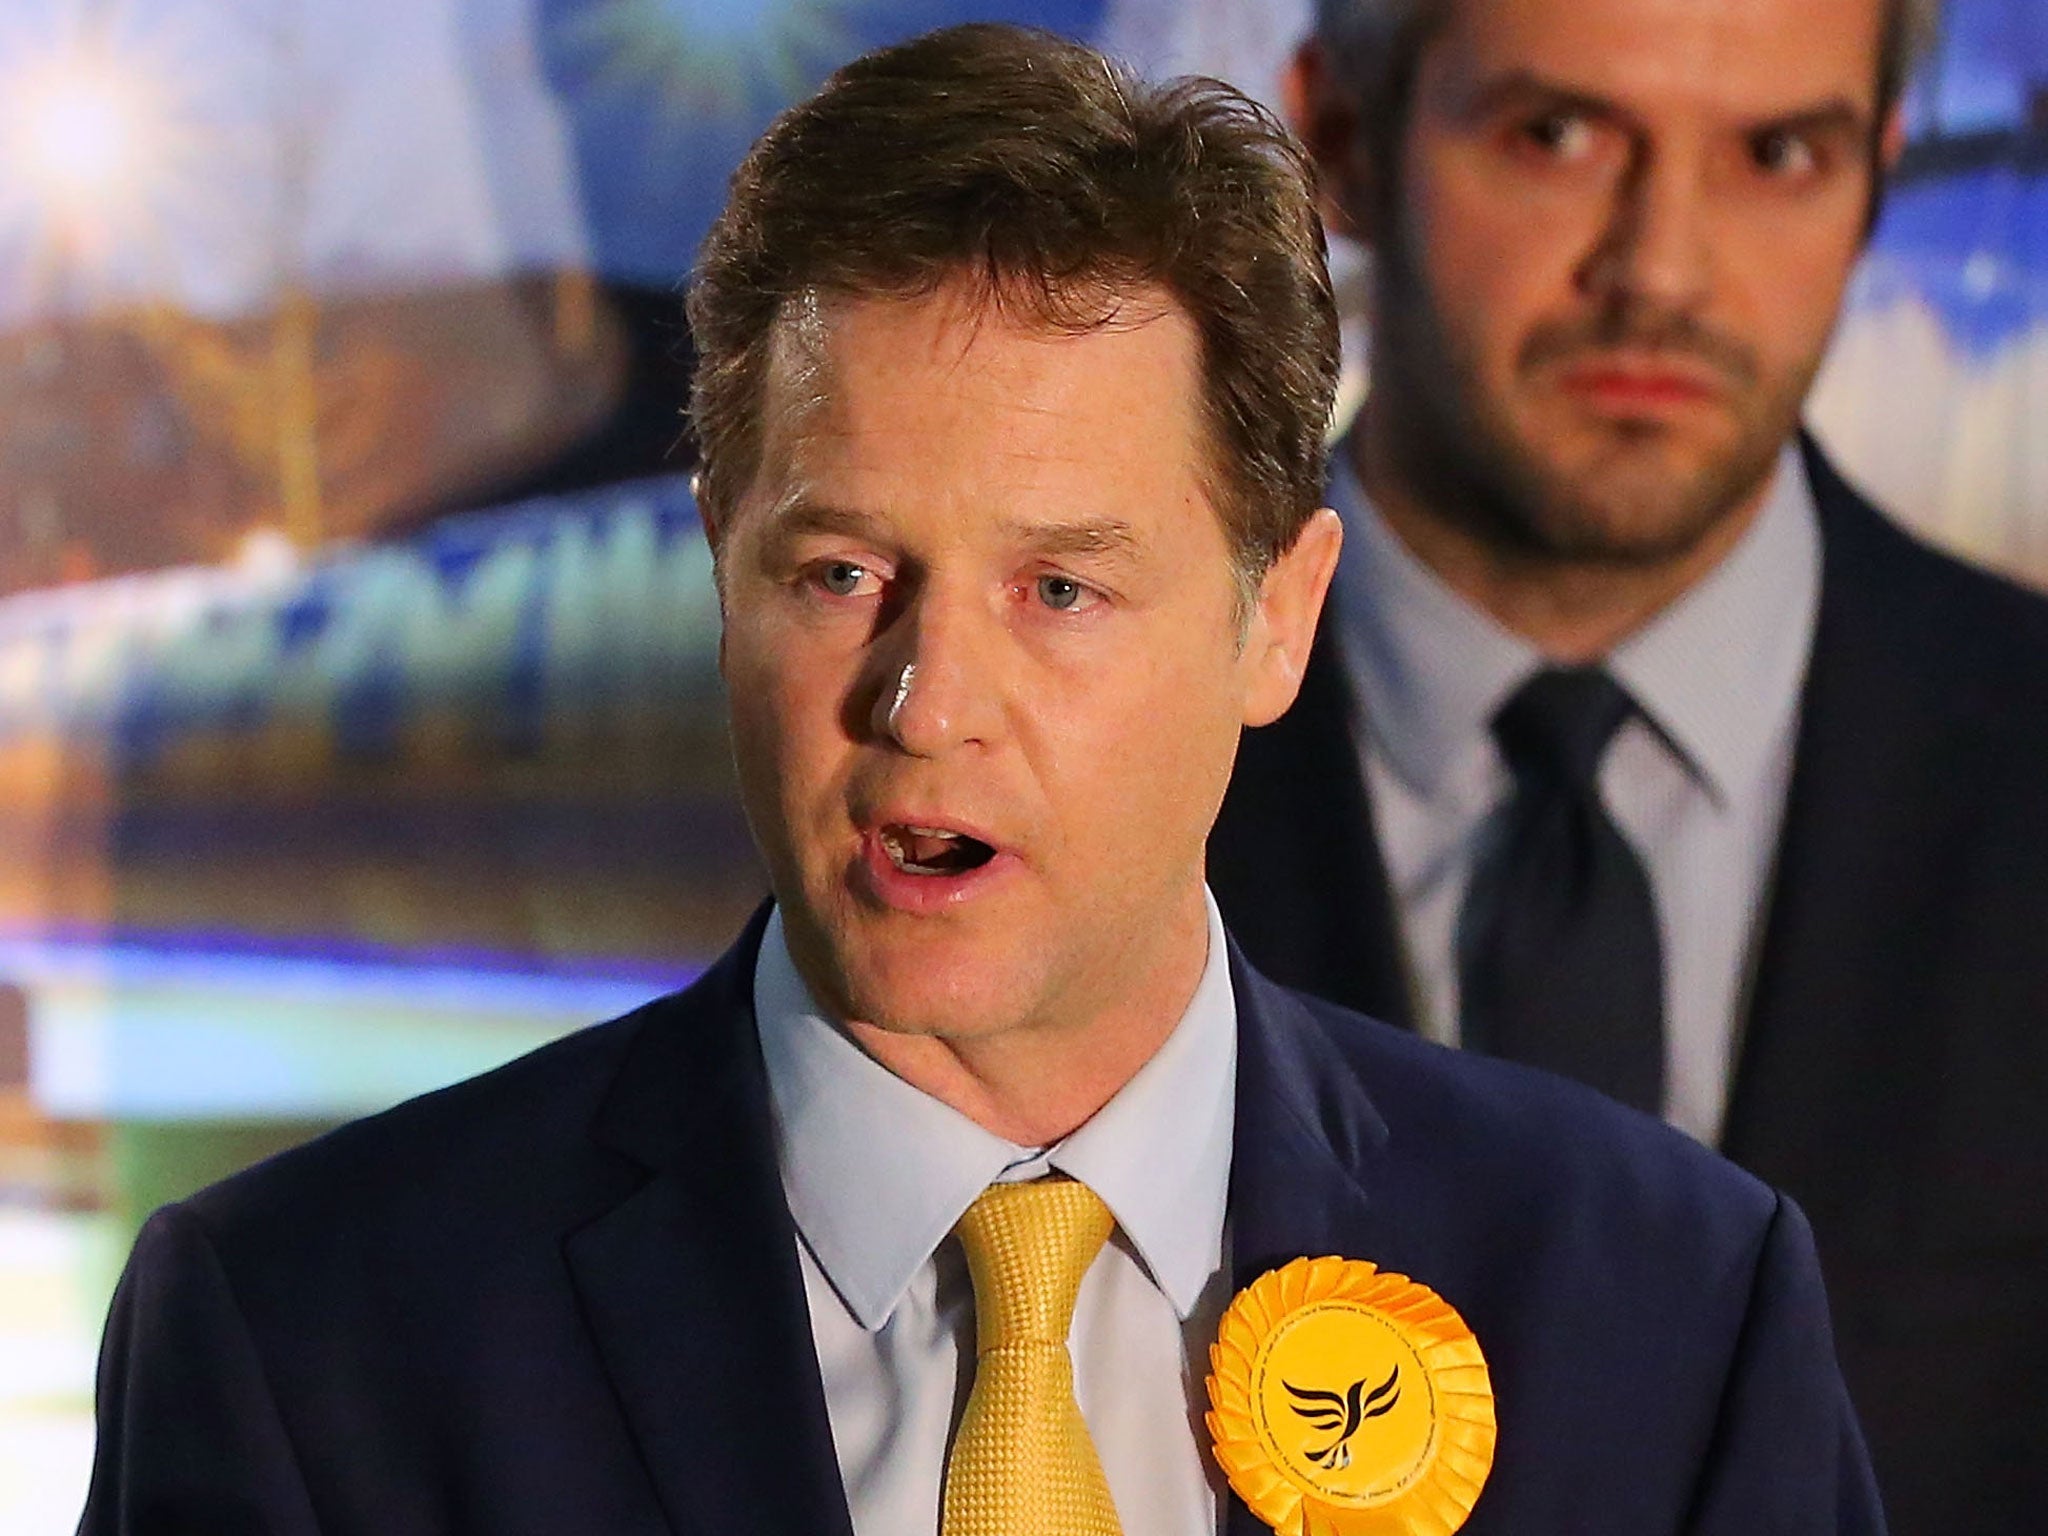 Clegg (to do a), verb 1 to break a pledge or promise, especially one written on a plastic "pledge card". 2 to wreck a political party but manage, miraculously, to survive personally. (Getty)